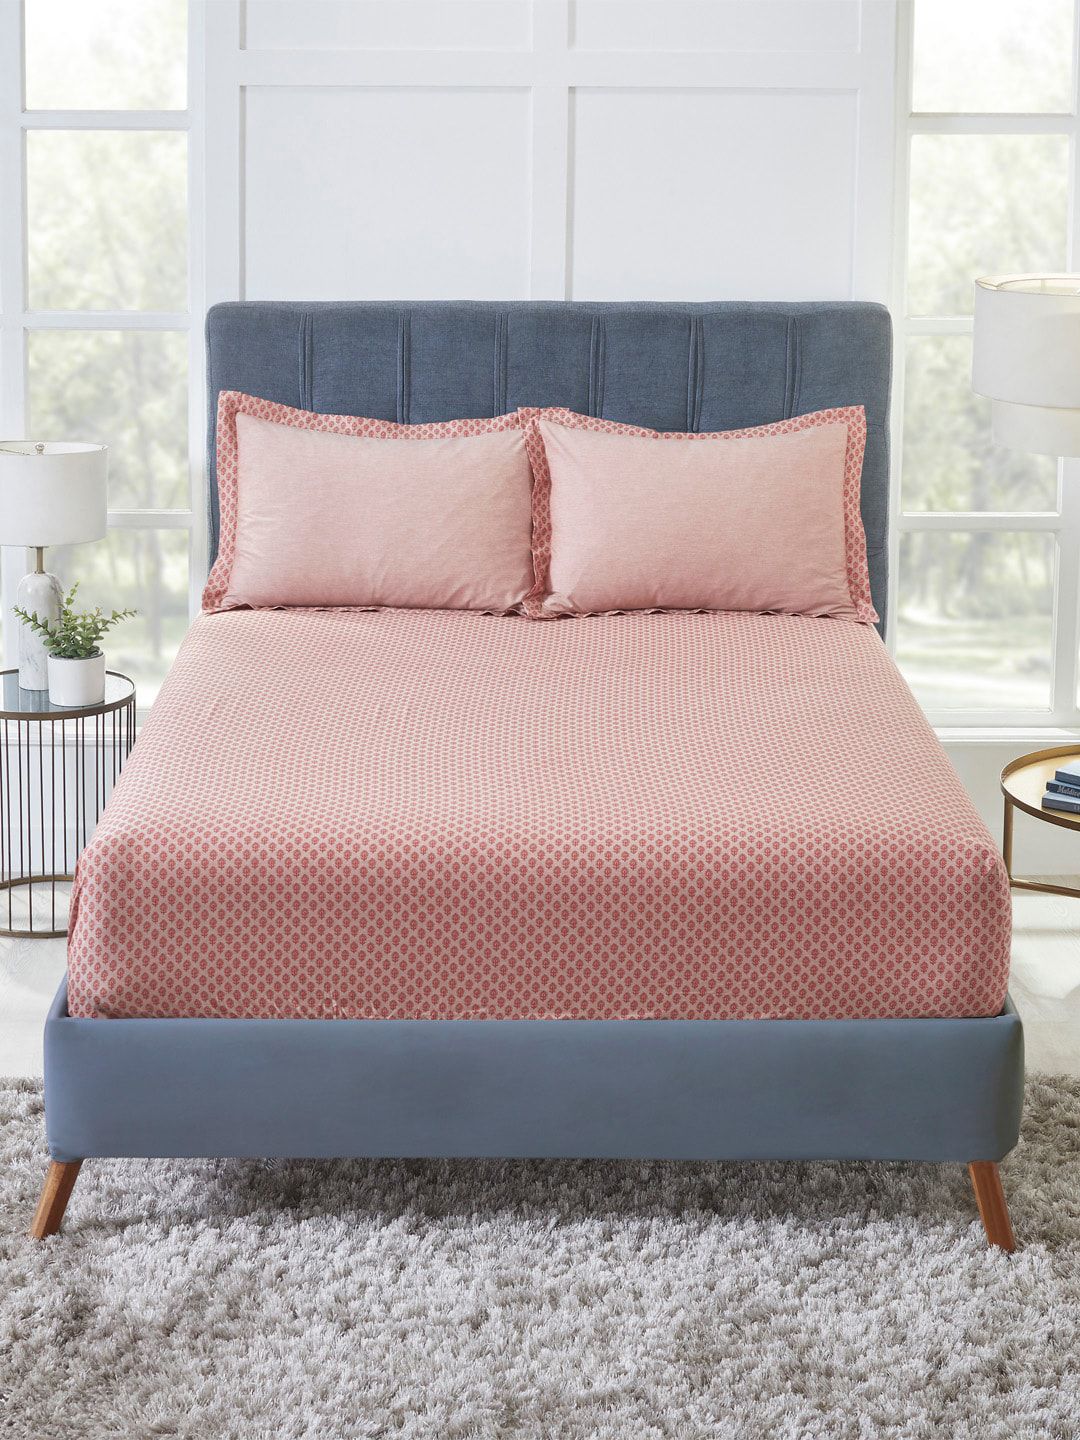 Trident Unisex Peach Bedsheets Price in India